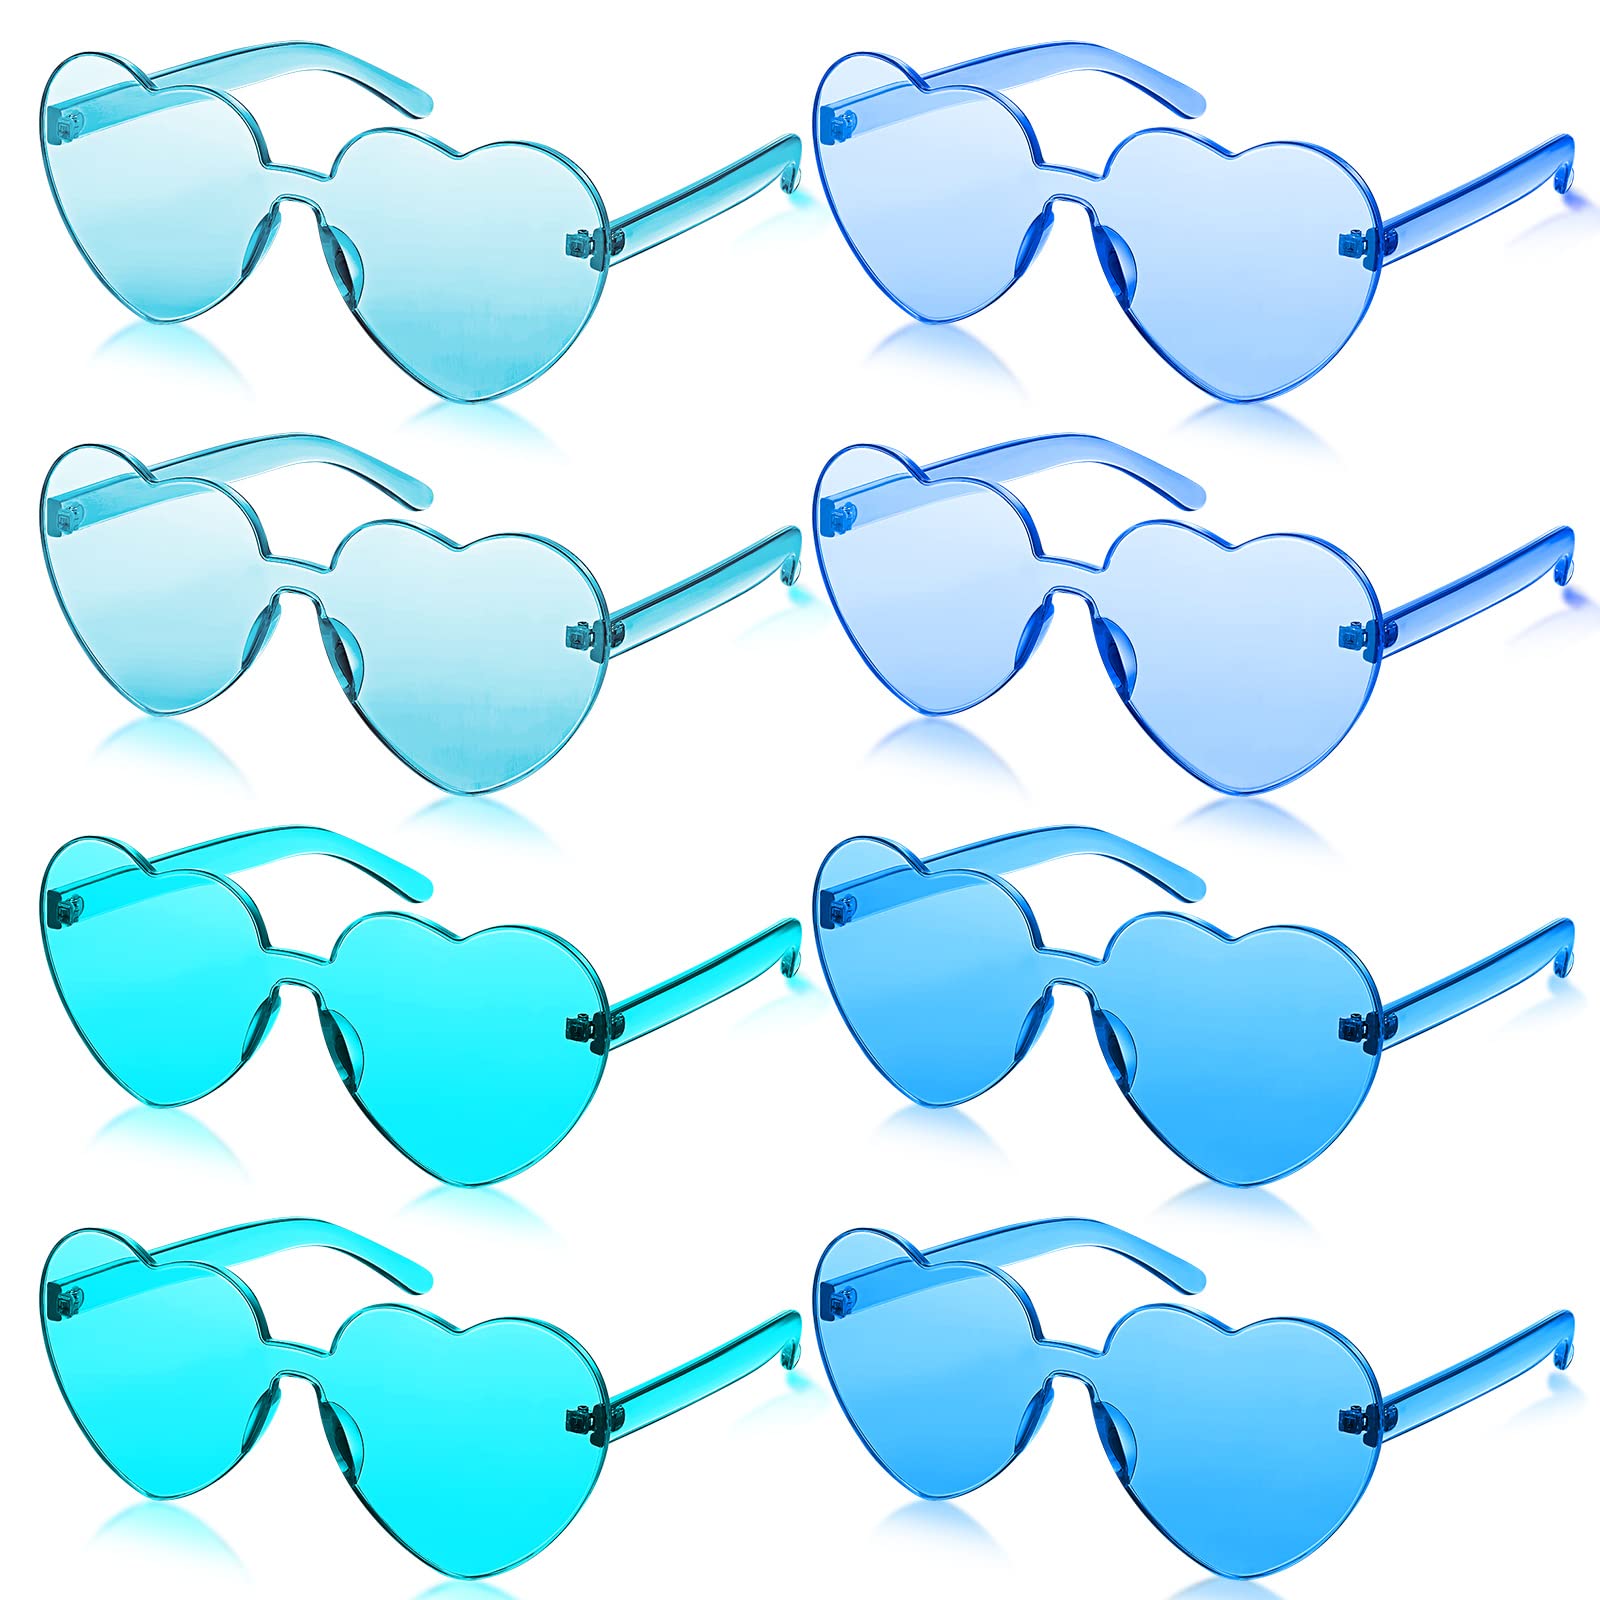 Frienda 8 Pairs Rimless Sunglasses Heart Shaped Frameless Glasses Trendy Transparent Candy Color Eyewear For Party Favor(Blue Series)